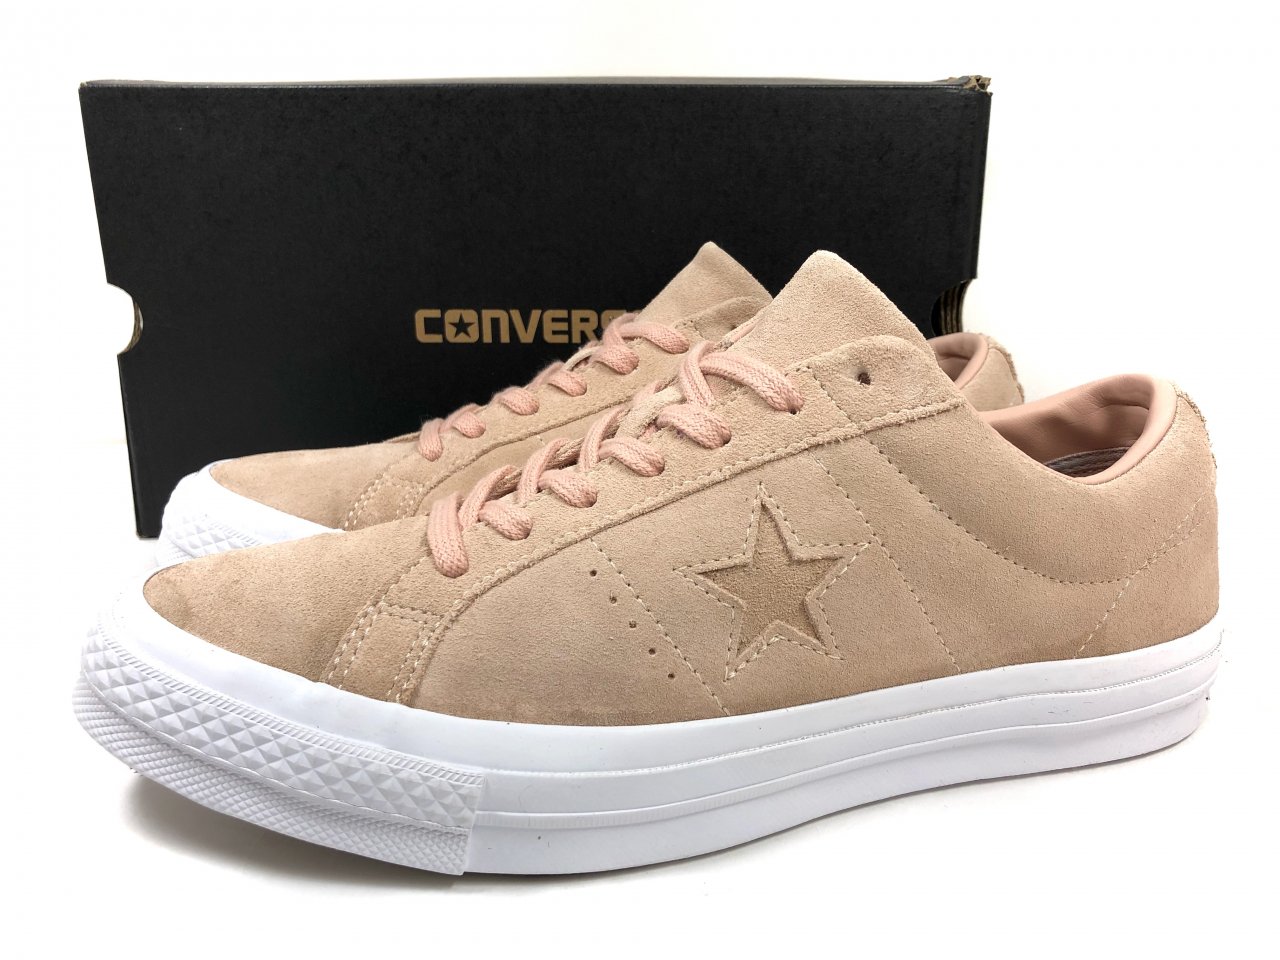 US企画 CONVERSE CONS ONE STAR OX DUST PINK SUEDE US8.5/27.0cm コンバース コンズ ワンスター  ピンク スエード - NEWJOKE ONLINE STORE